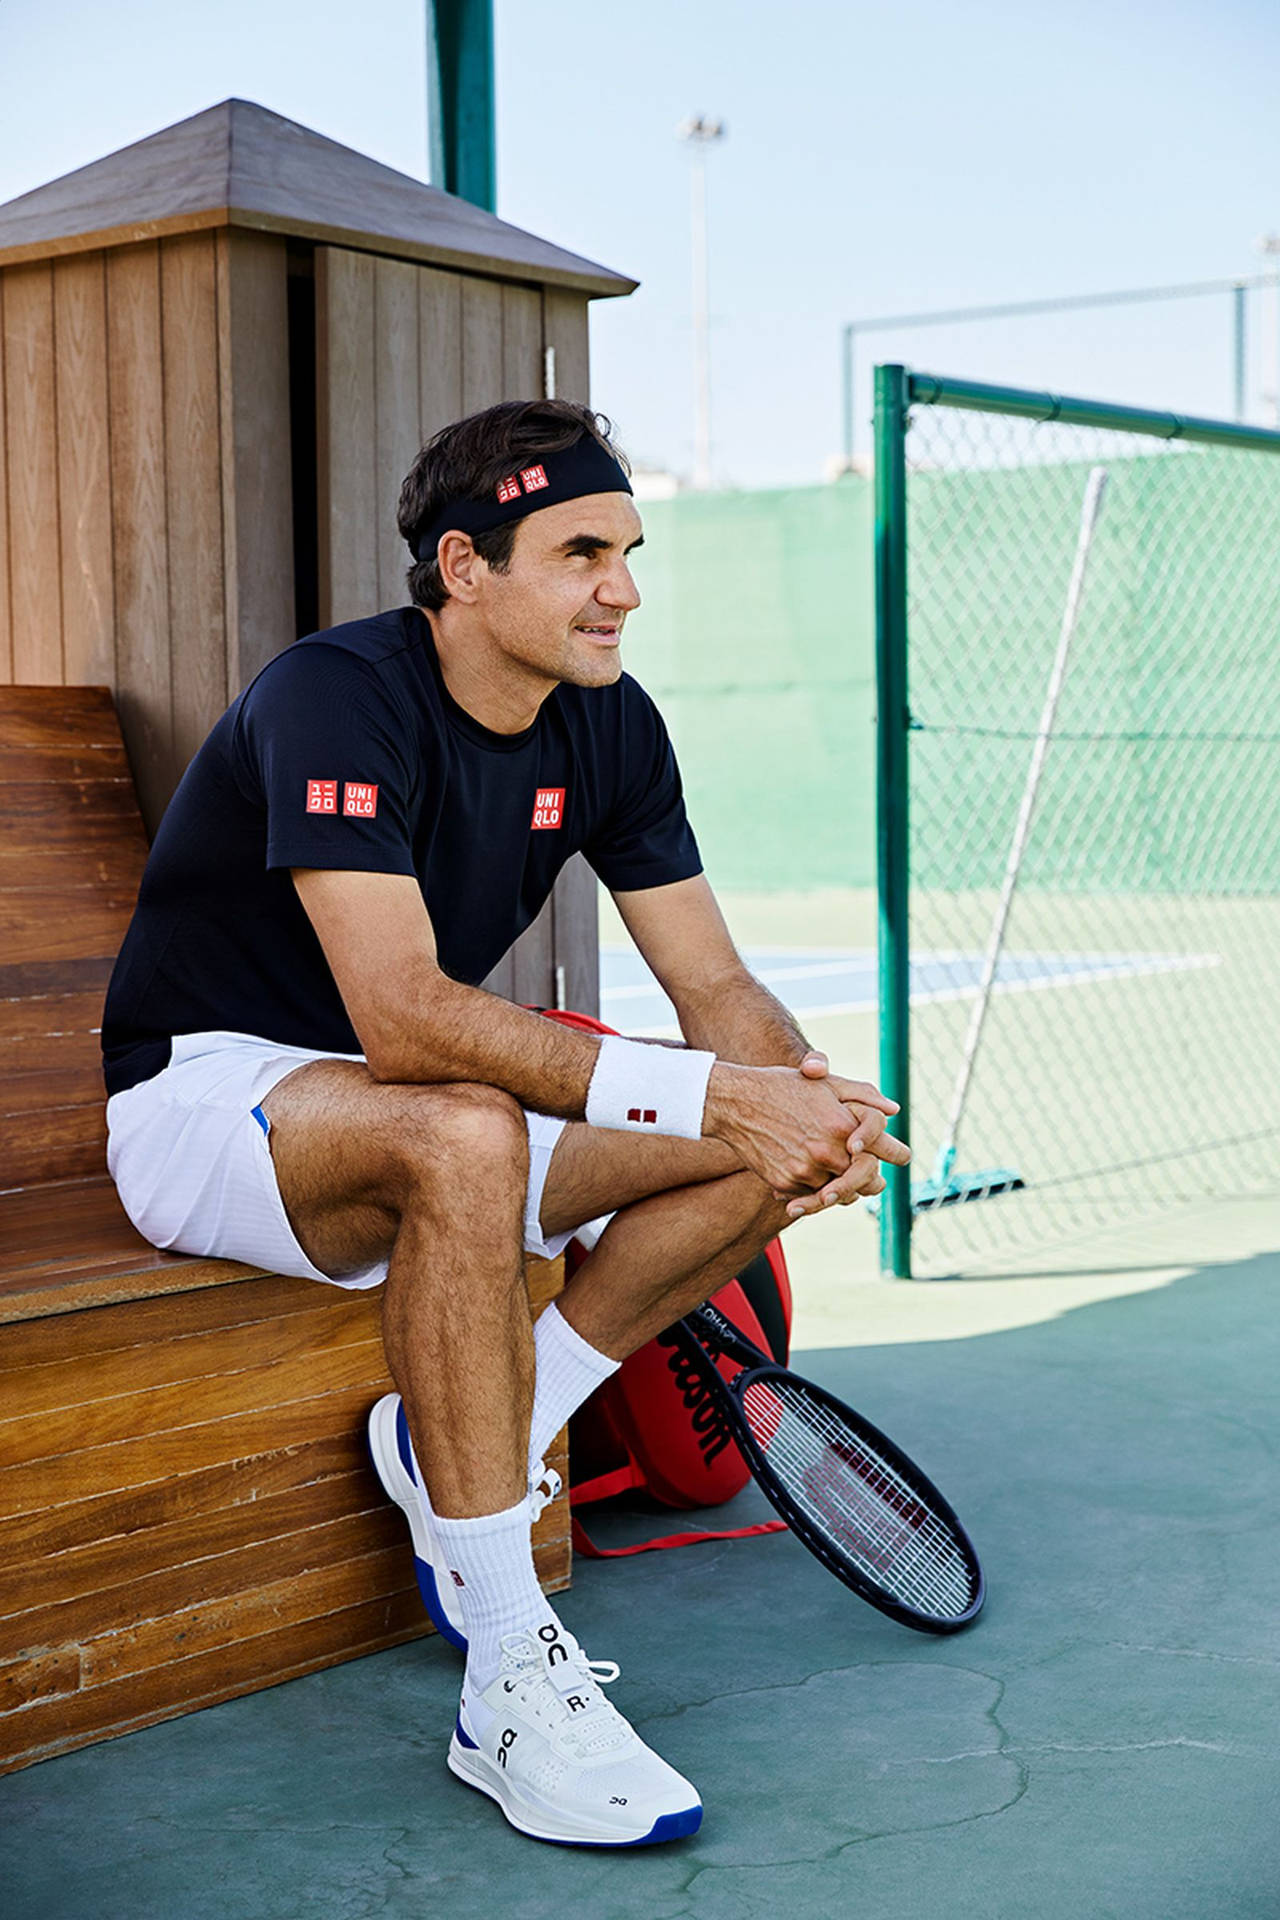 Roger Federer Uniqlo Tennis Outfit